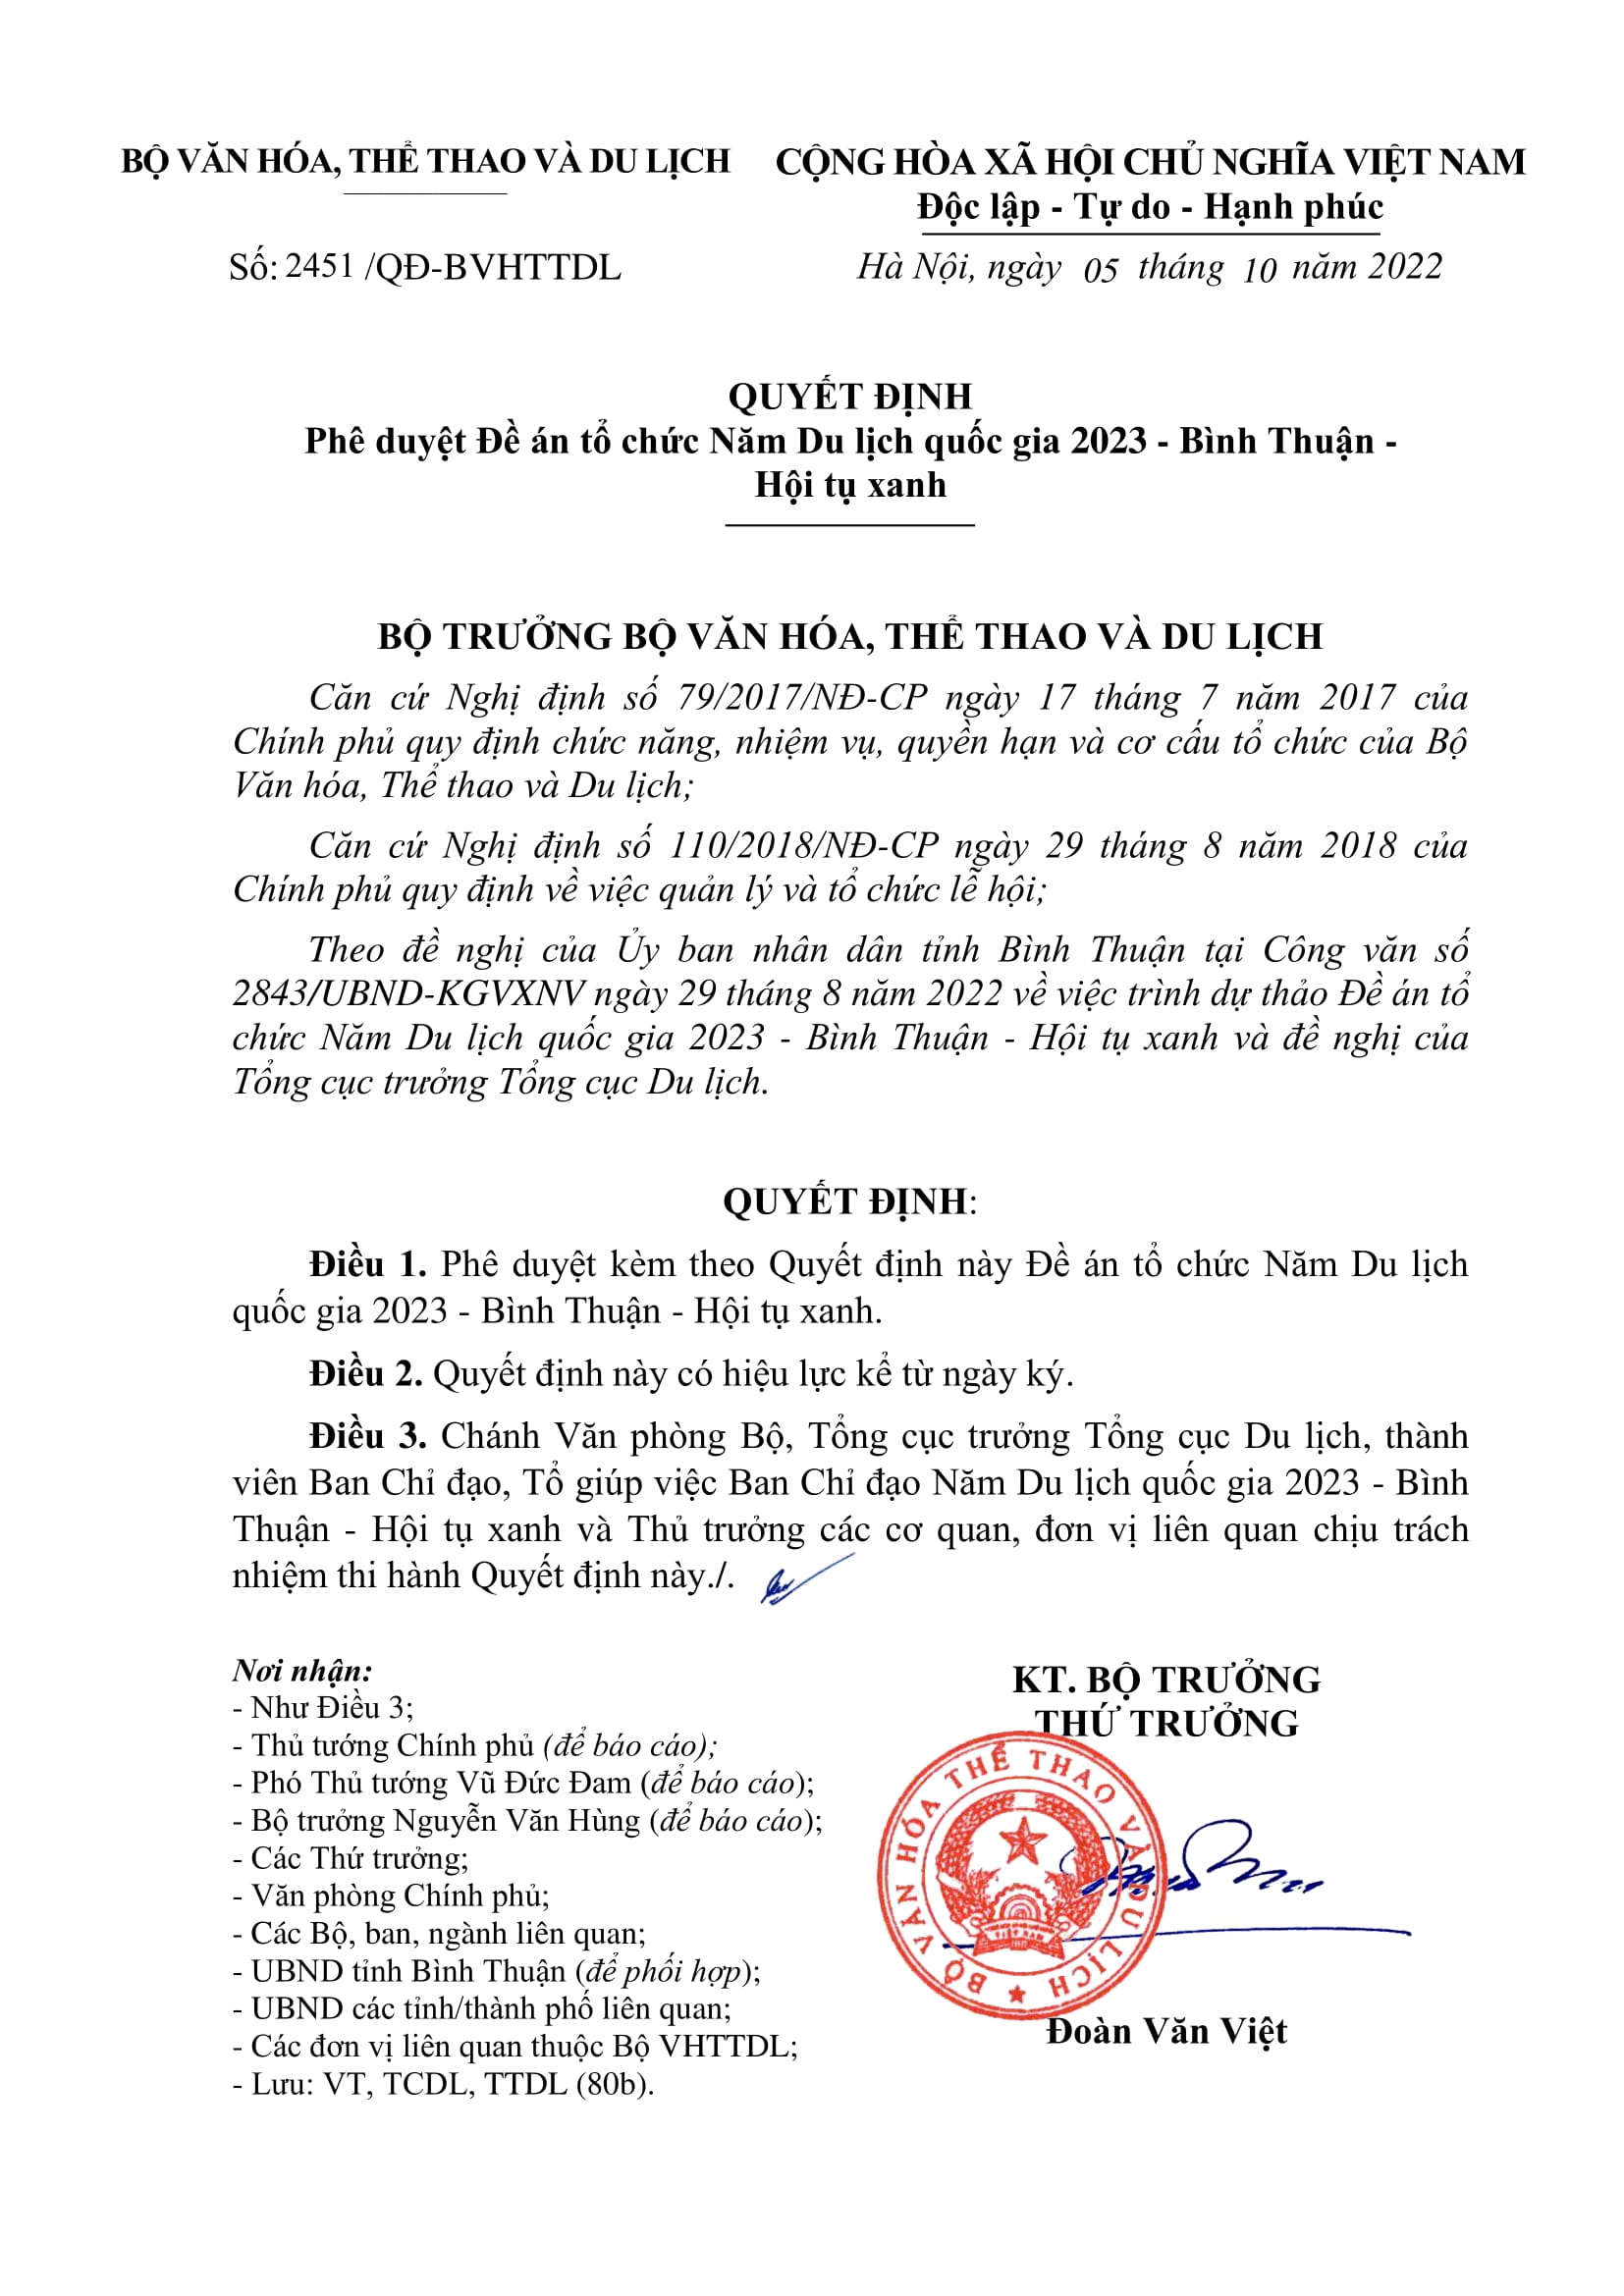 DECISION - Approving the Scheme to organize the National Tourism Year 2023 - Binh Thuan - Green convergence.